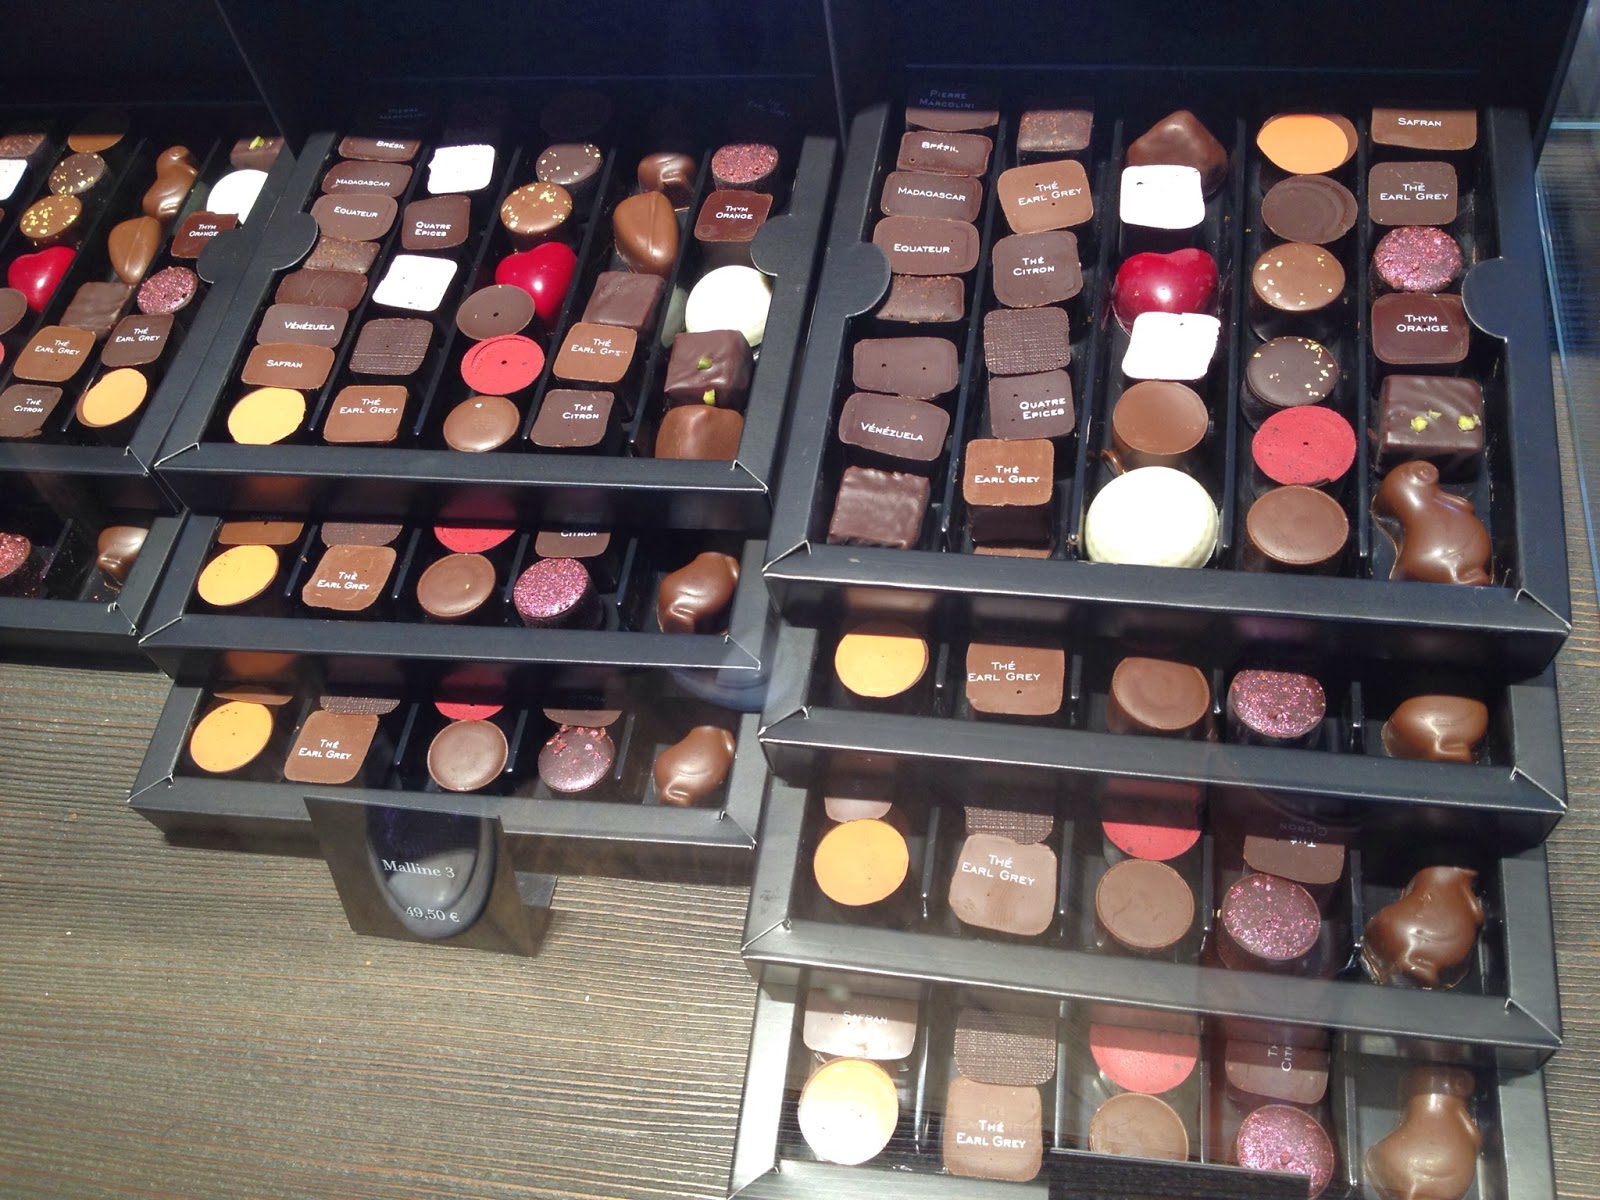 Brussels - Chocolate selection at Pierre Marcolini